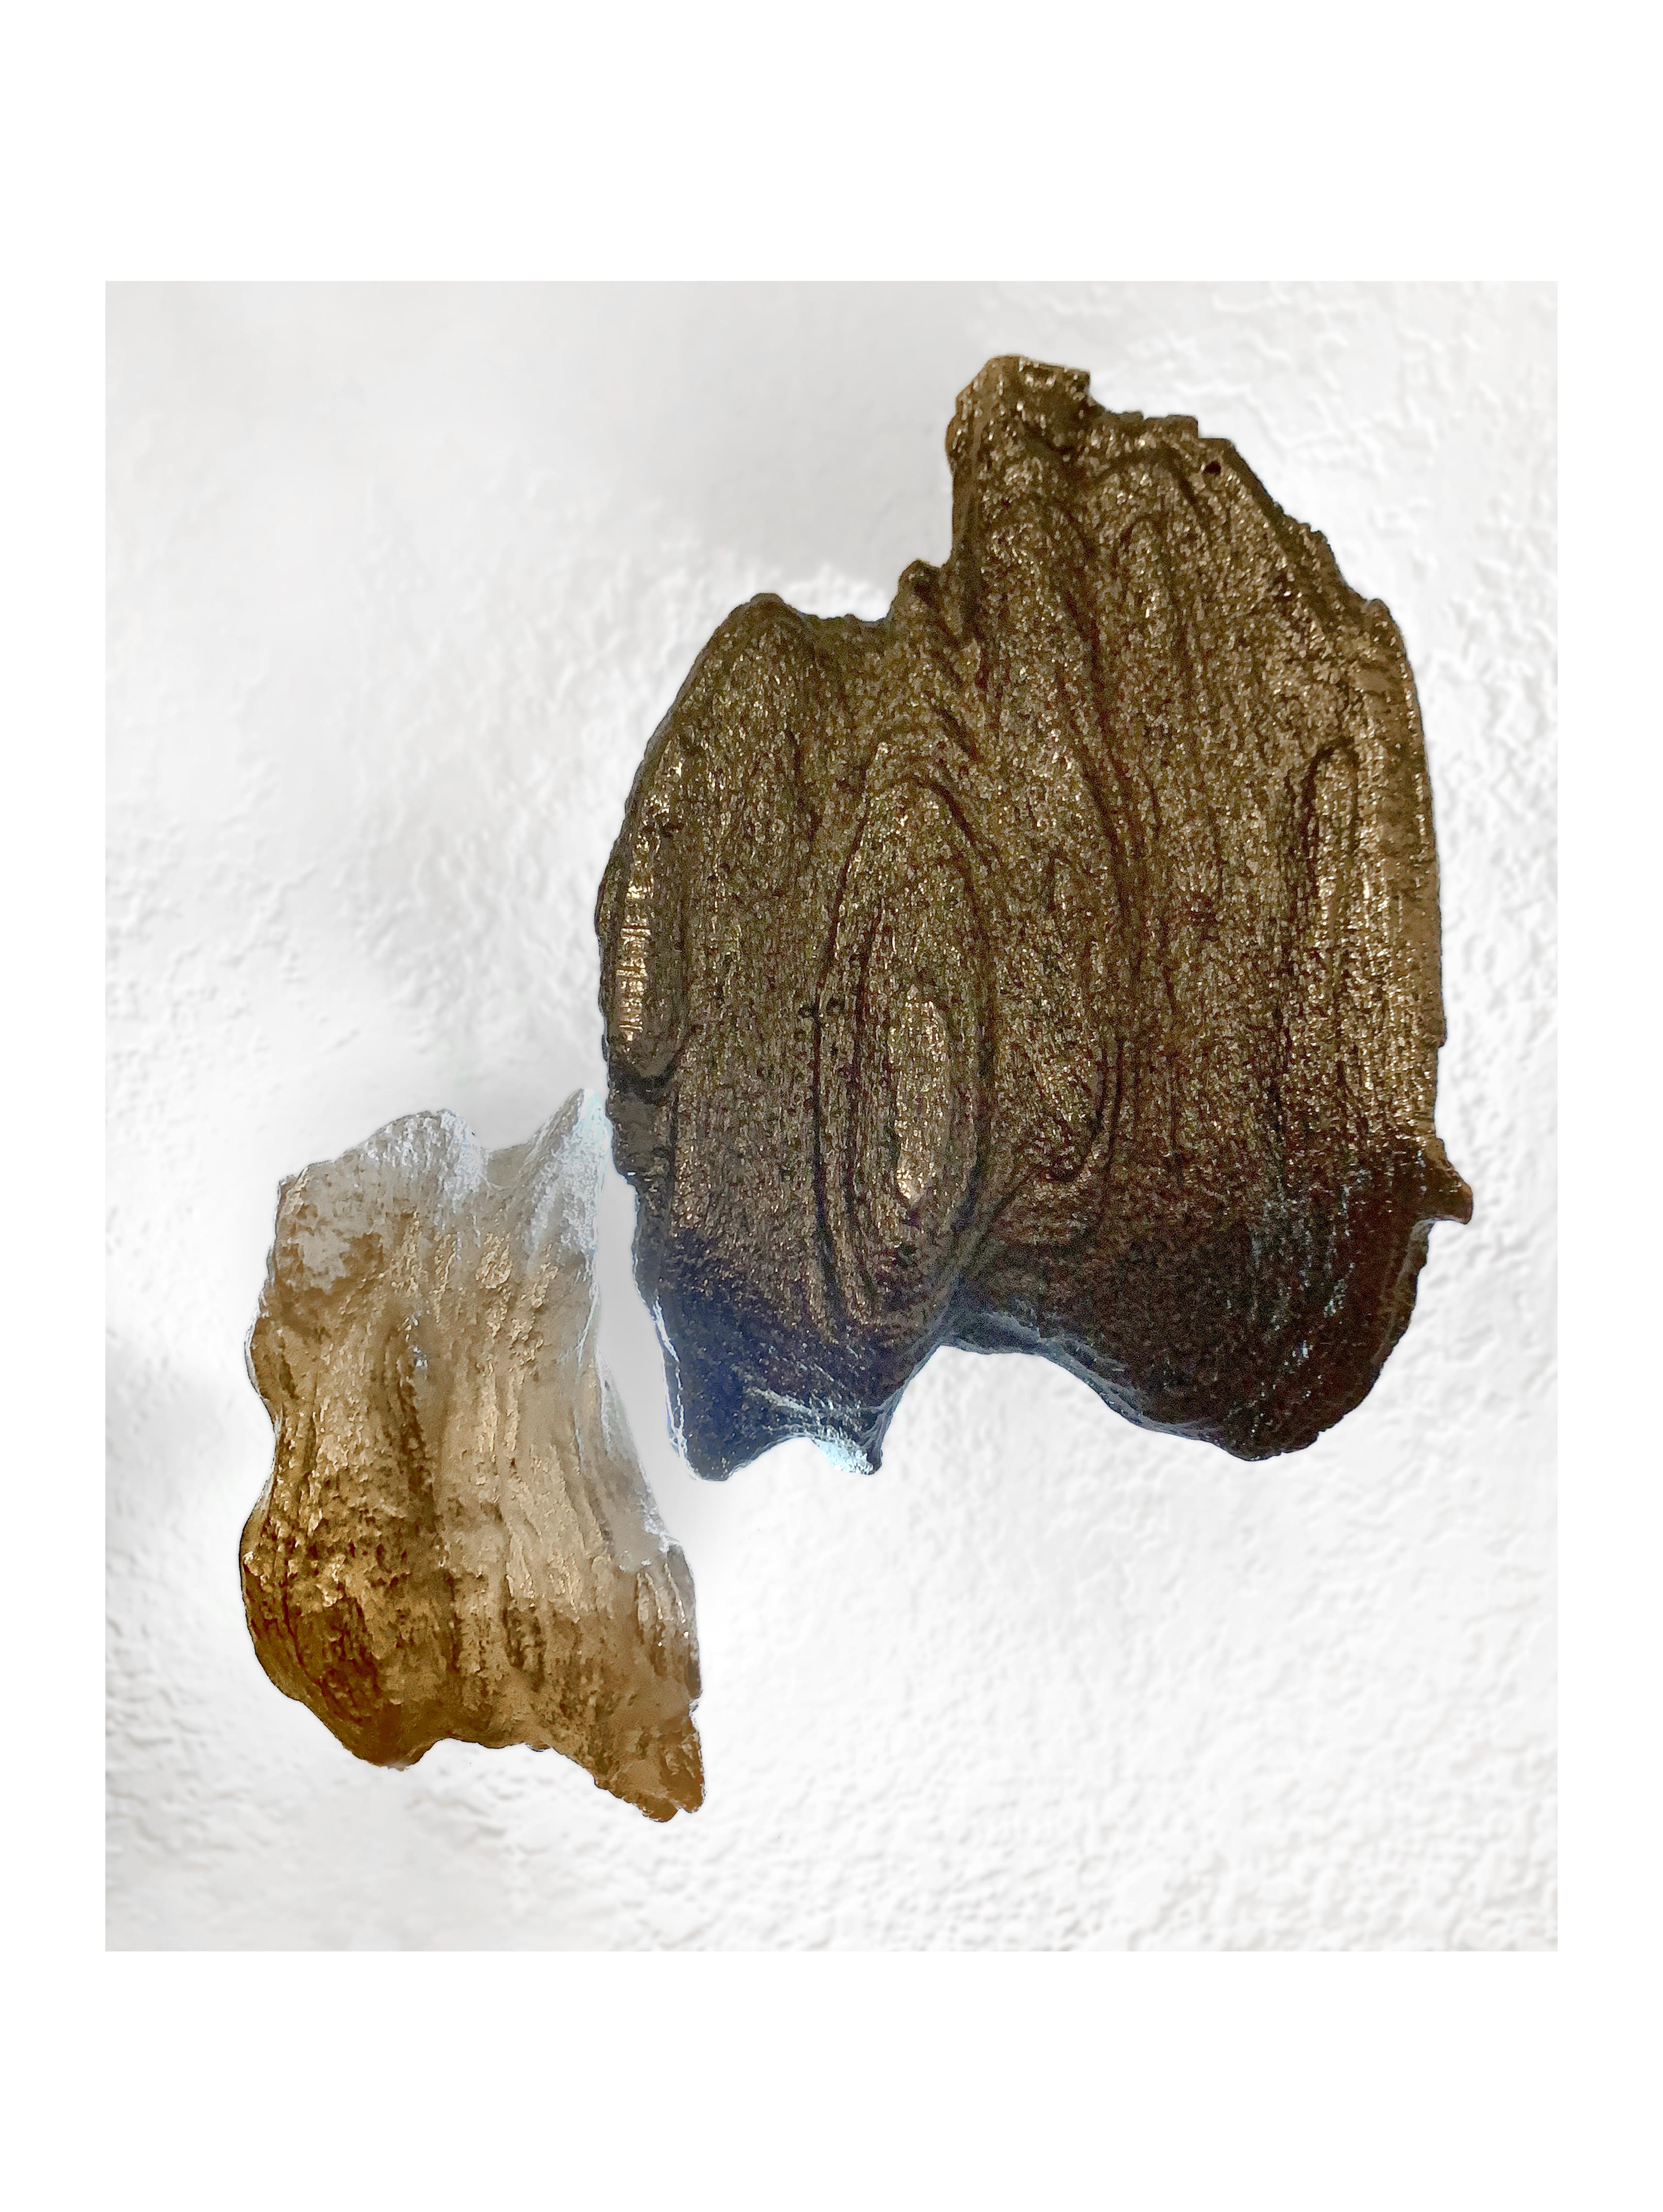 DESERT BURL SERIES (“OYSTERS”)
ILLUMINATED SCULPTURE SCONCES

Black nickel and silver plated bronze, LED lights, 2020, 9 x 11 x 2.5 in. 

The decorative metal plates mount over (2) two electrical boxes set in within the wall. The Jbox has an acrylic